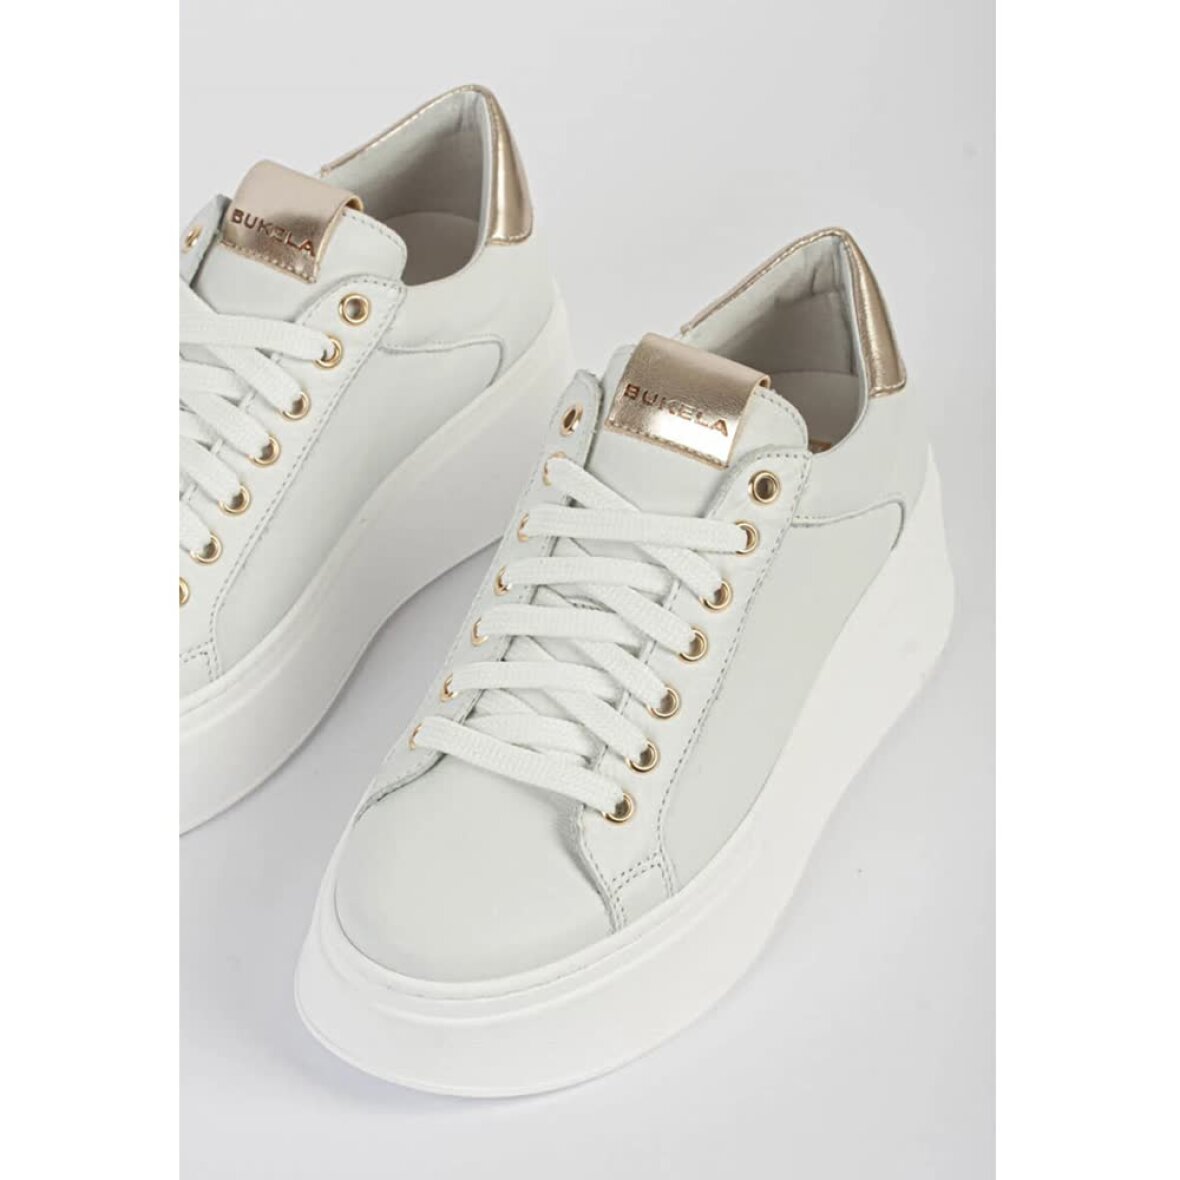 Bukela Coco Sneakers / white with gold